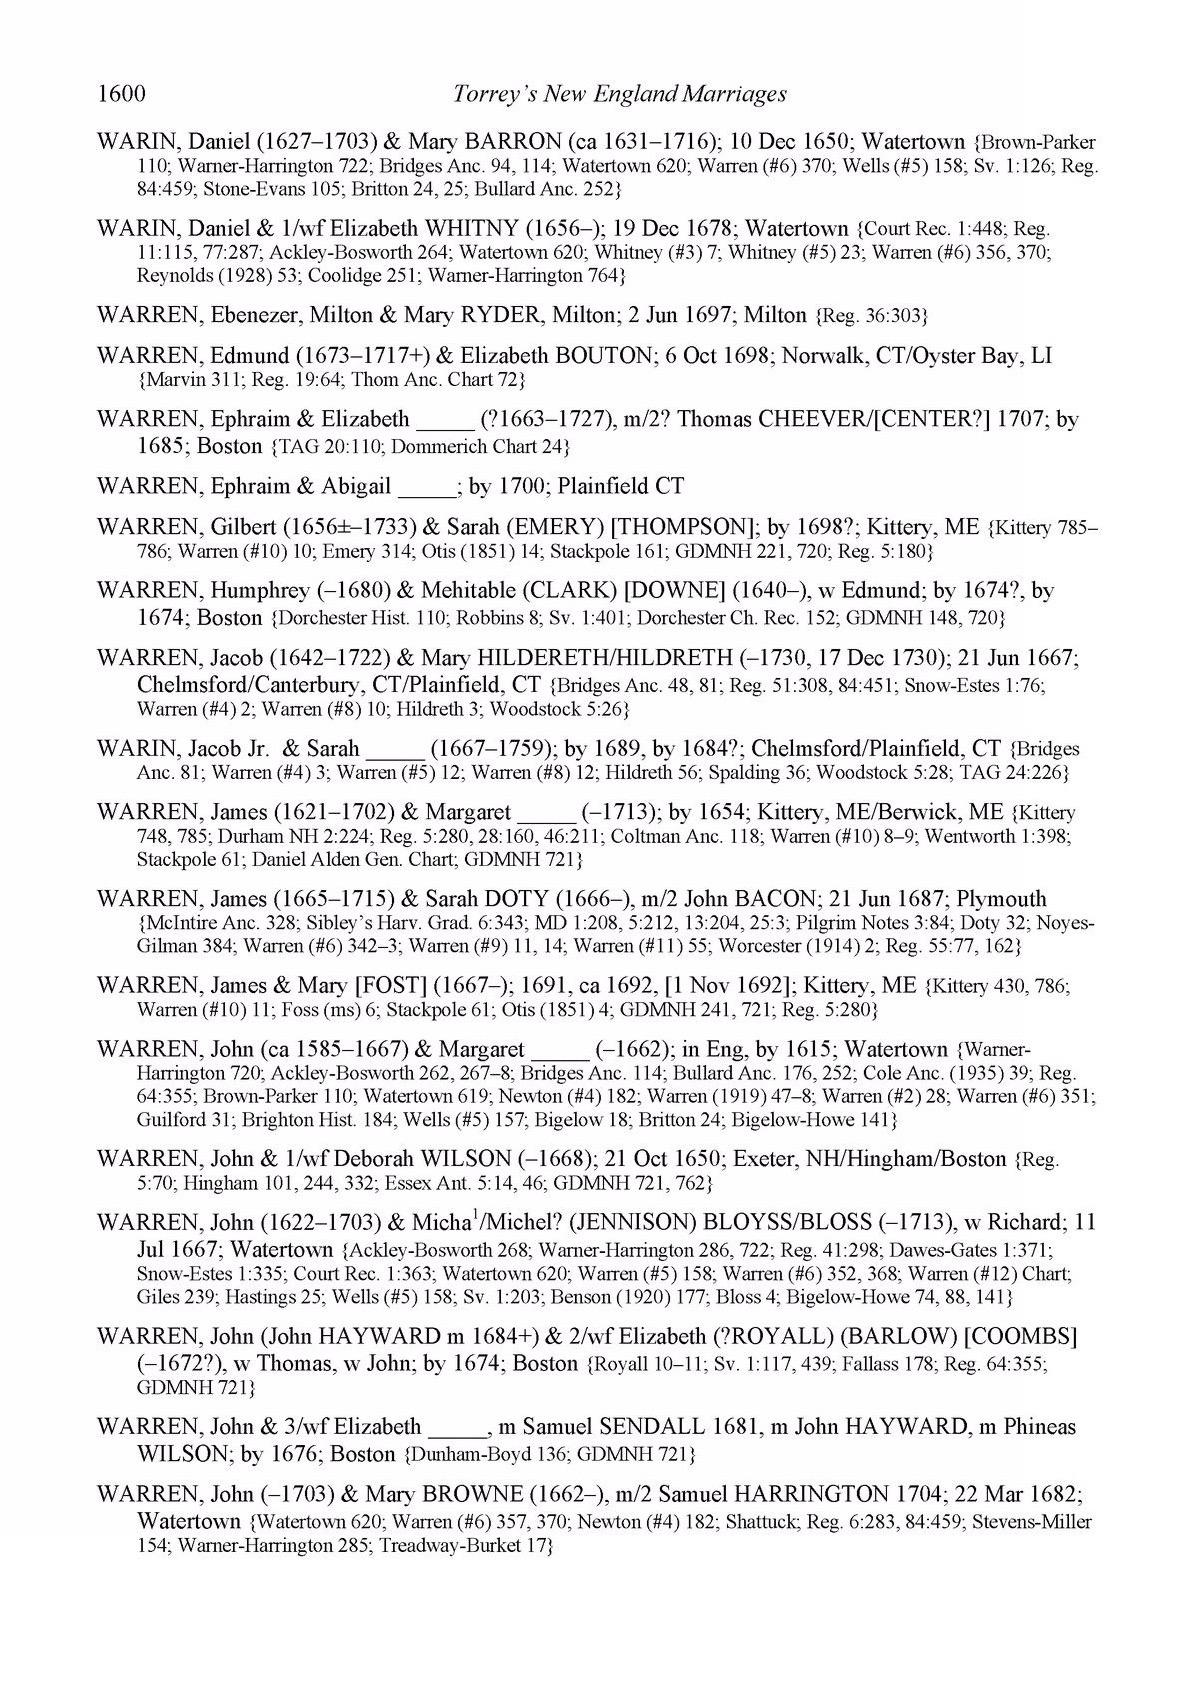 Document showing several Warren marriage records.